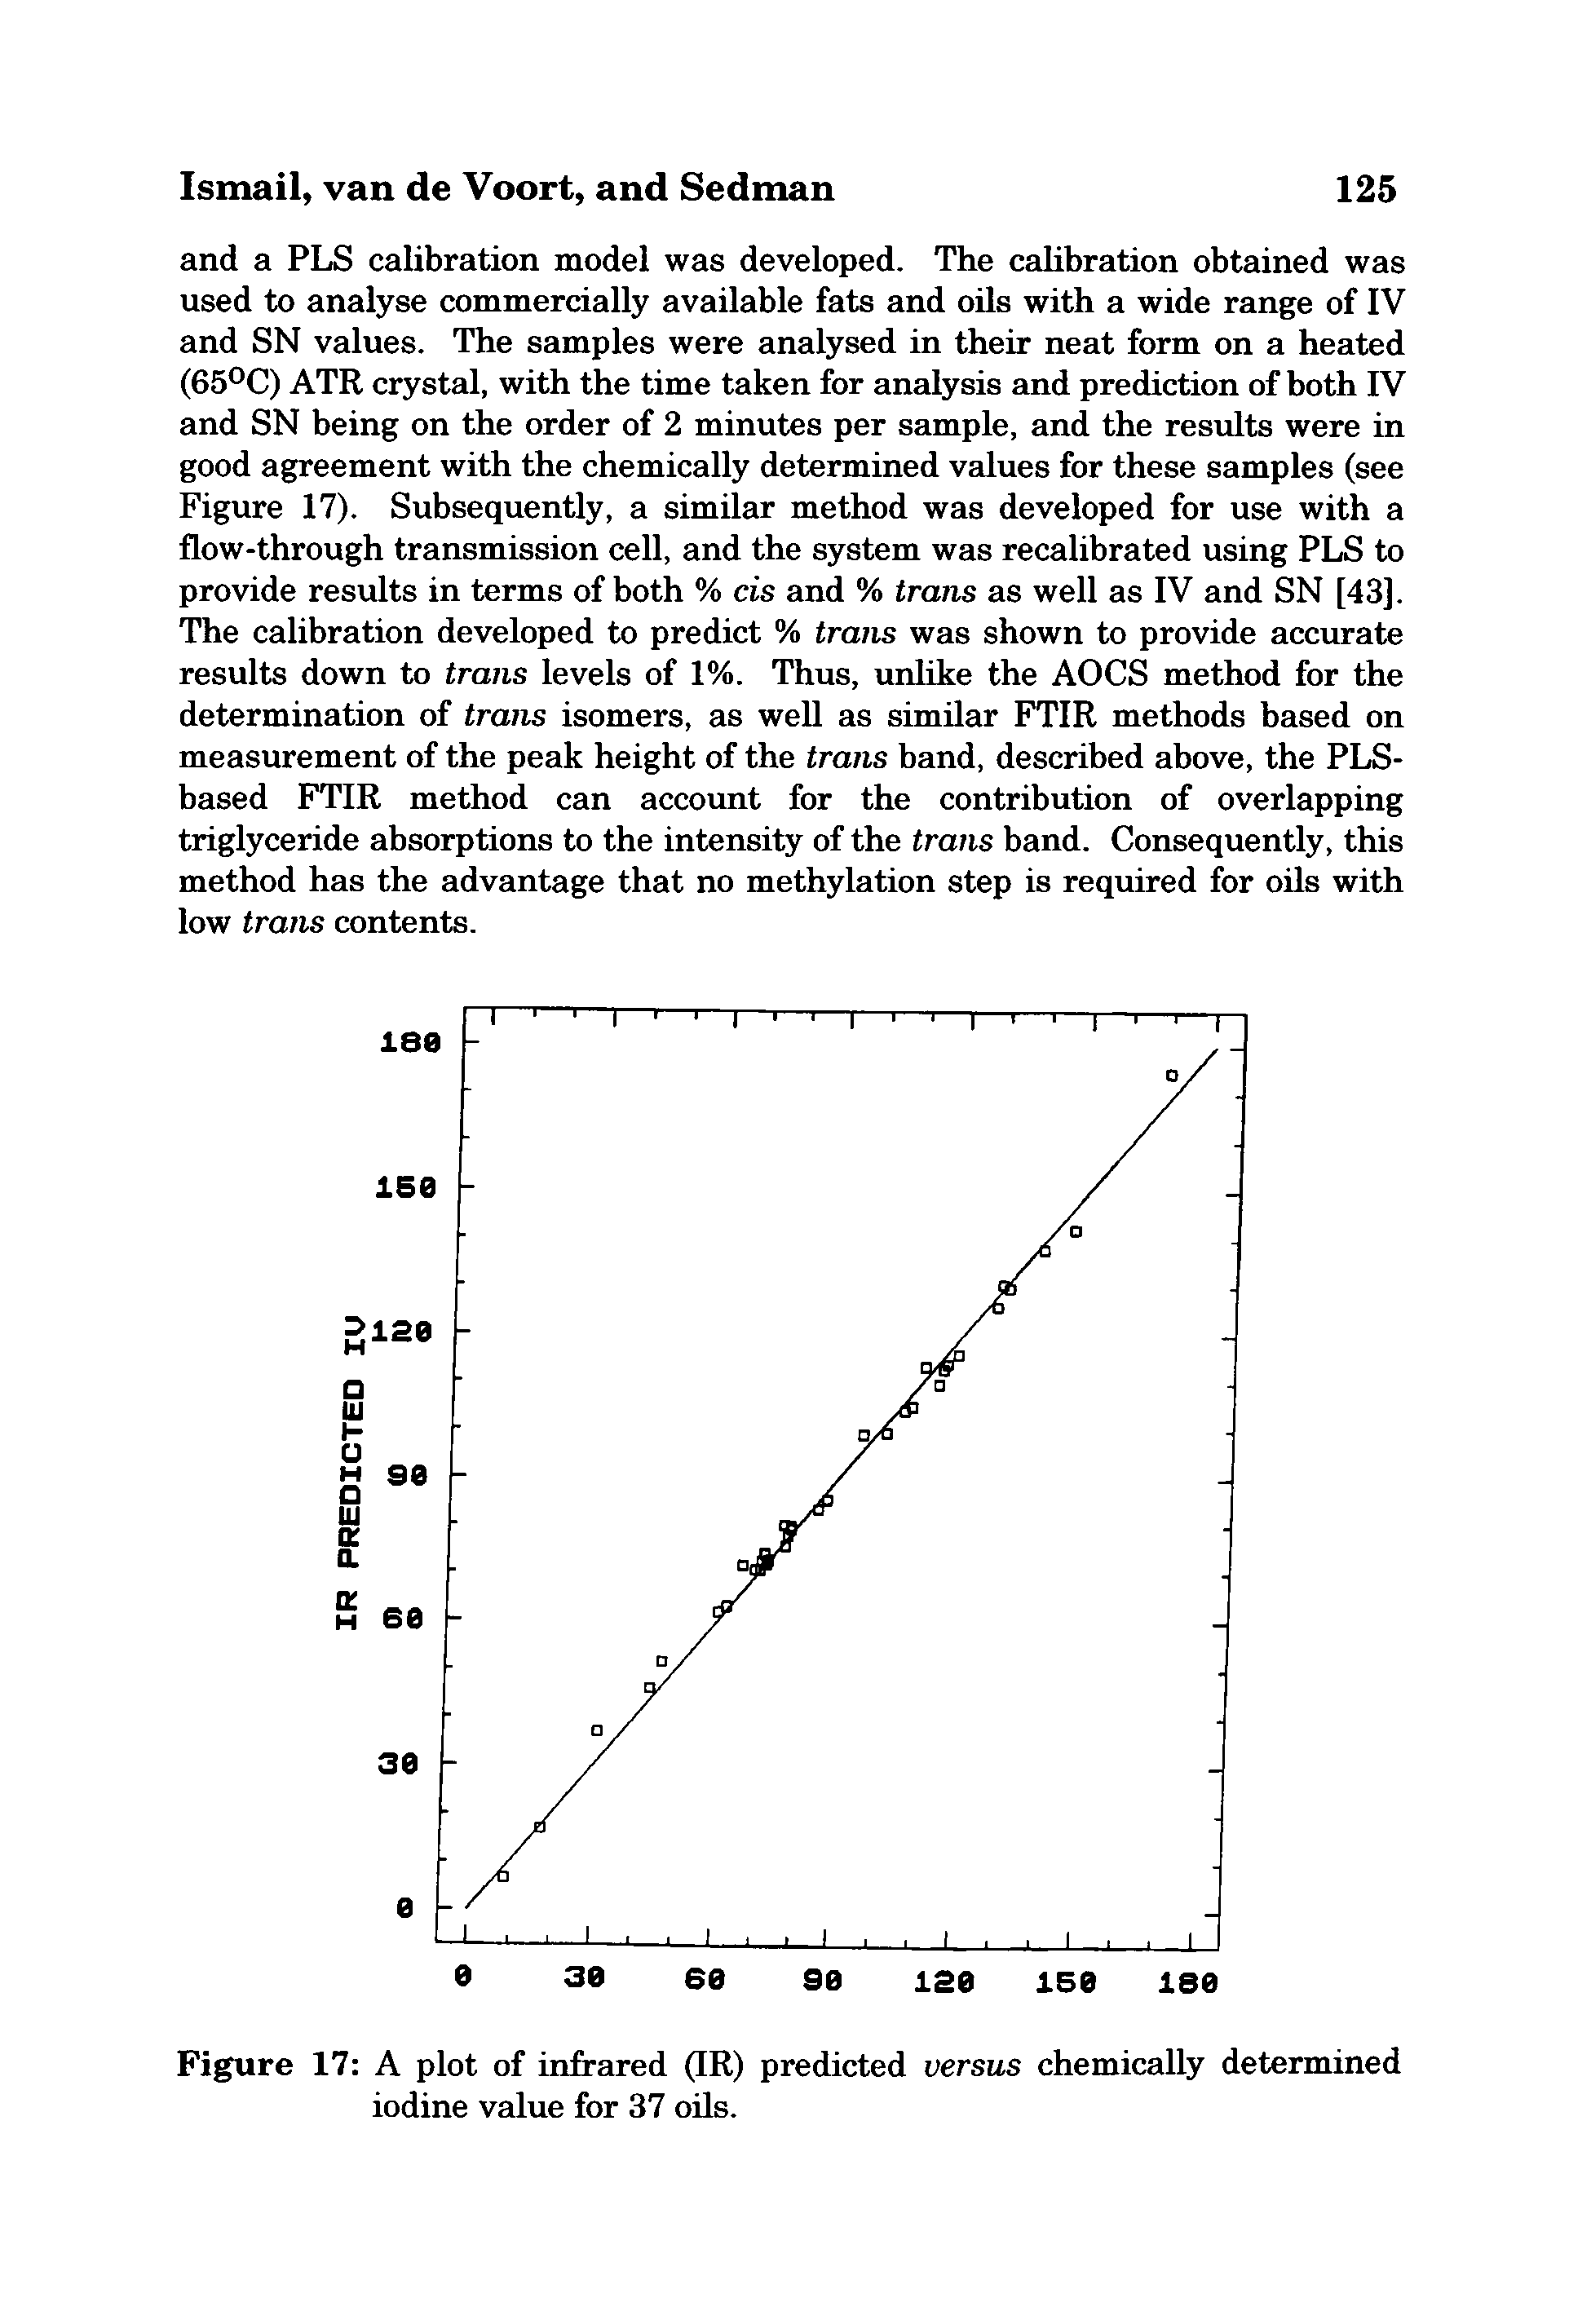 Figure 17 A plot of infrared (IR) predicted versus chemically determined iodine value for 37 oUs.